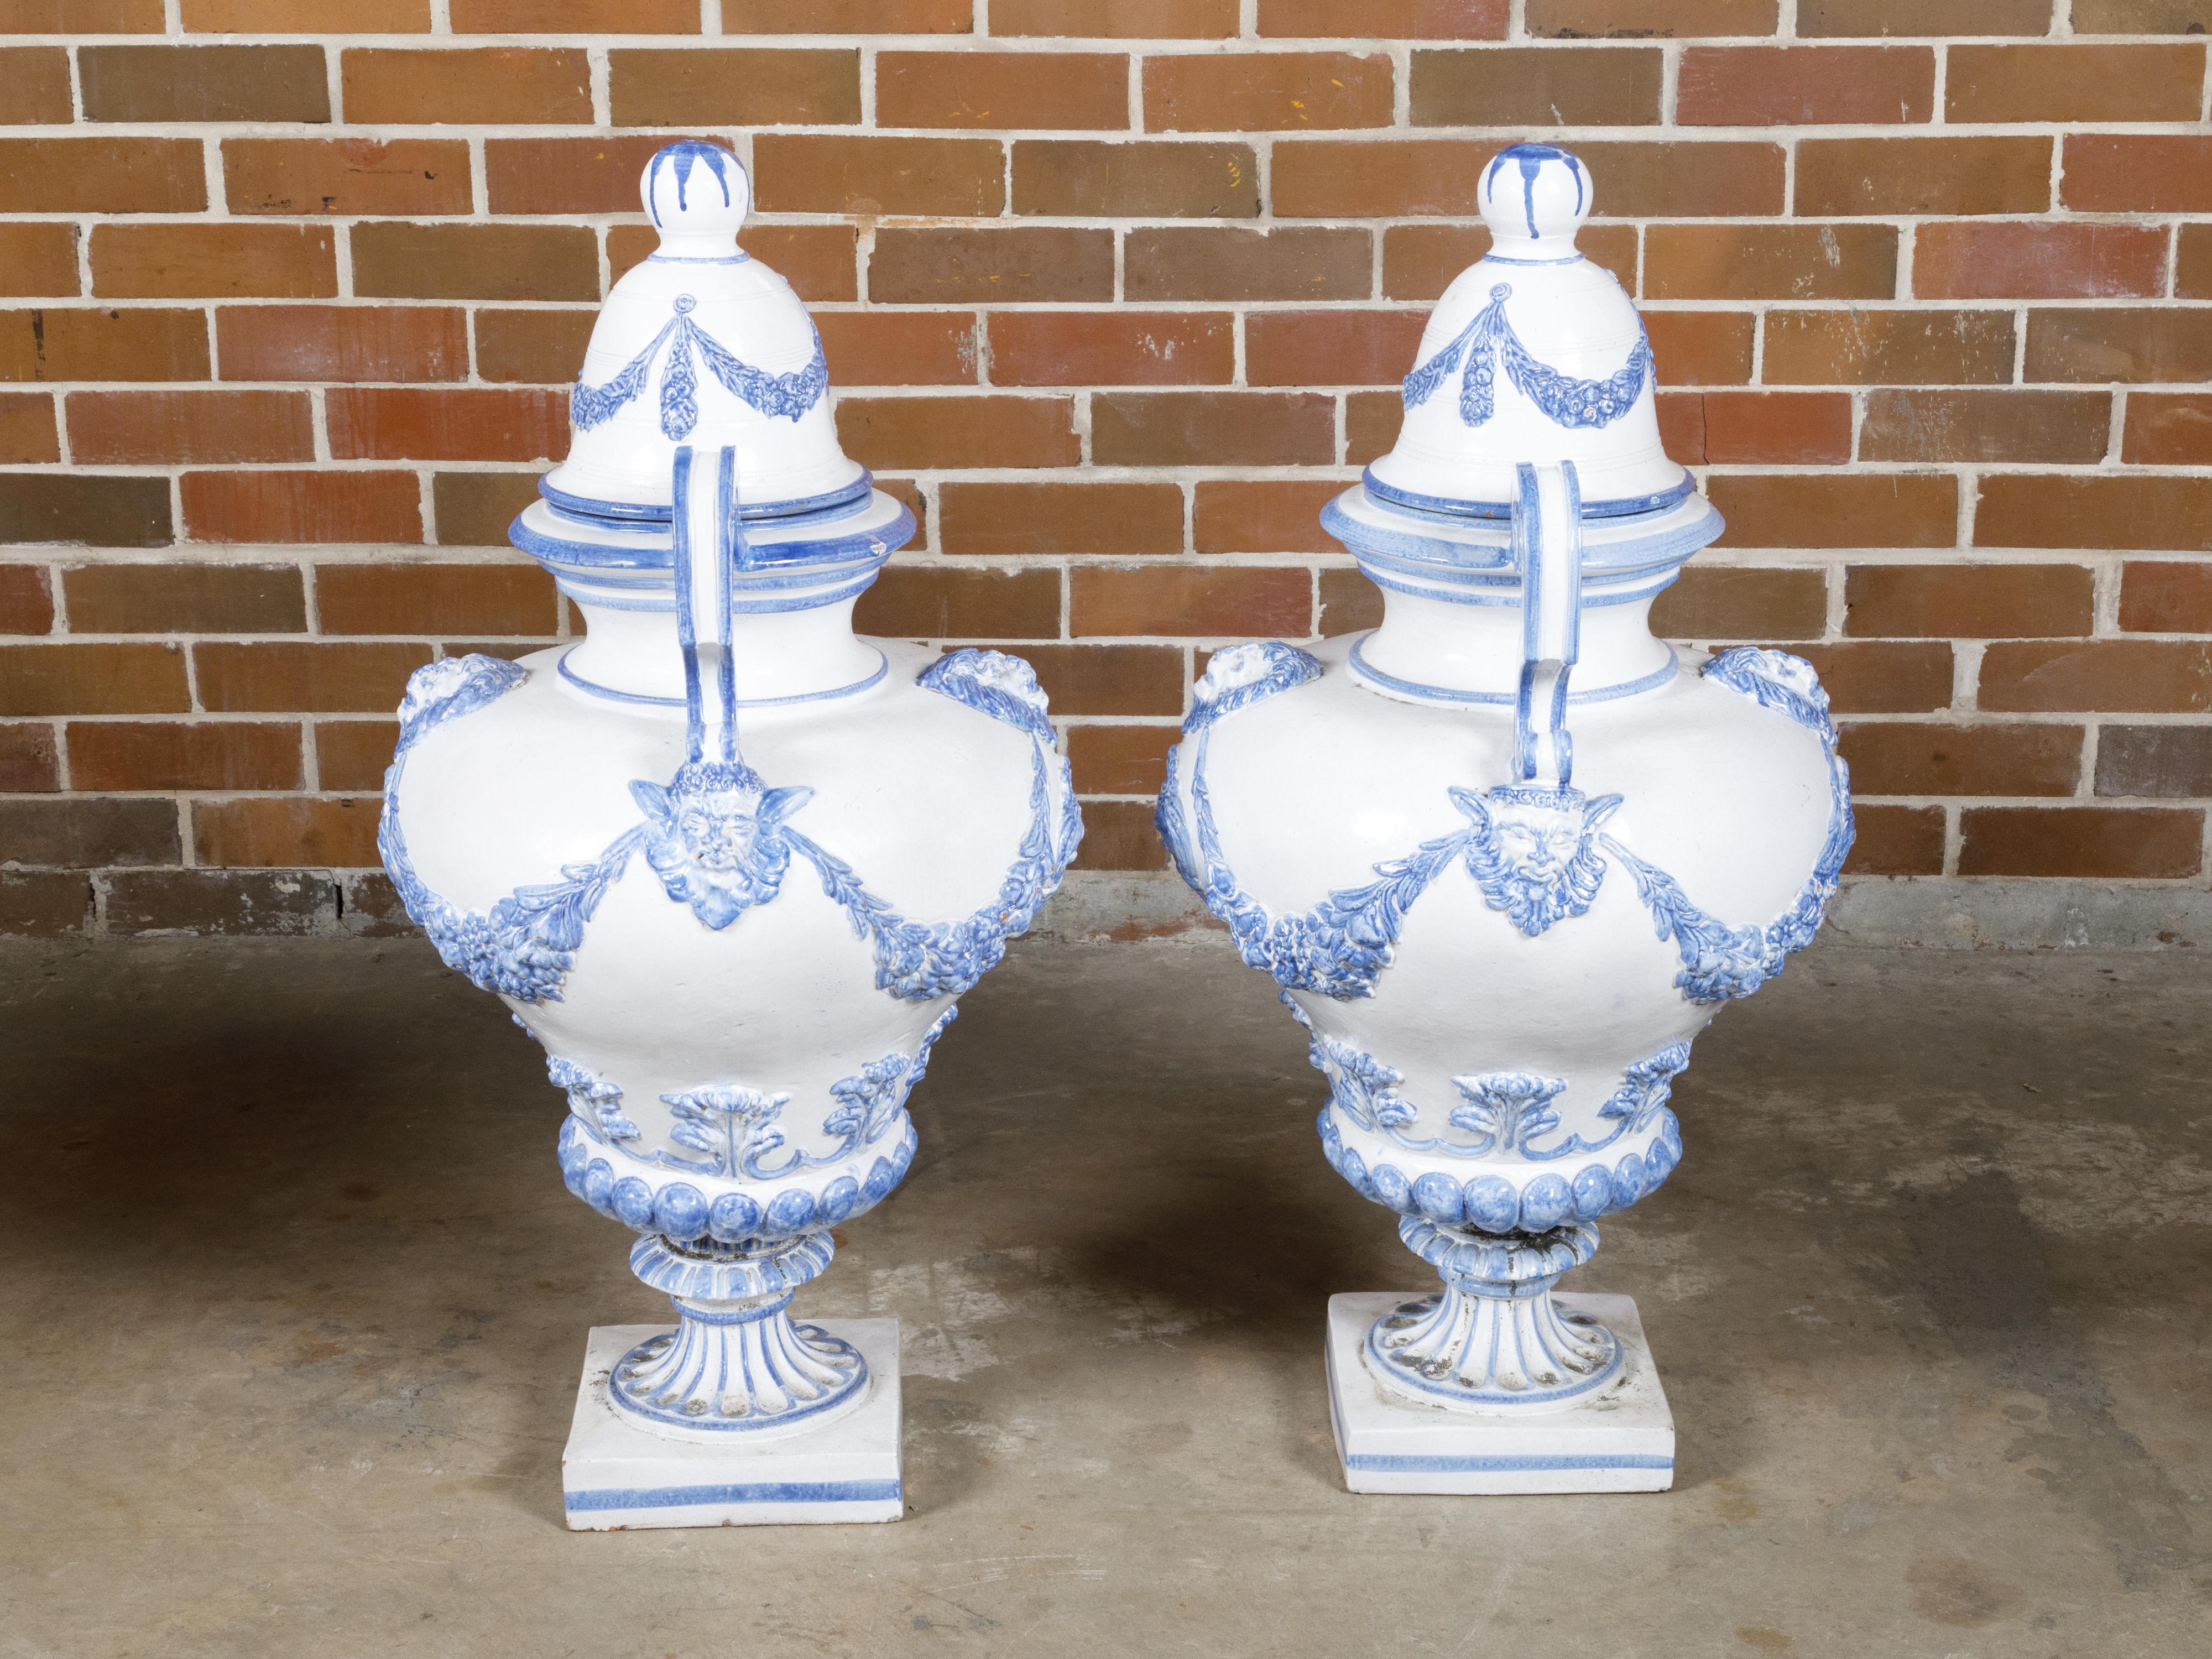 Italian Turn of the Century Blue and White Faience Lidded Jars with Fauns, Pair For Sale 10